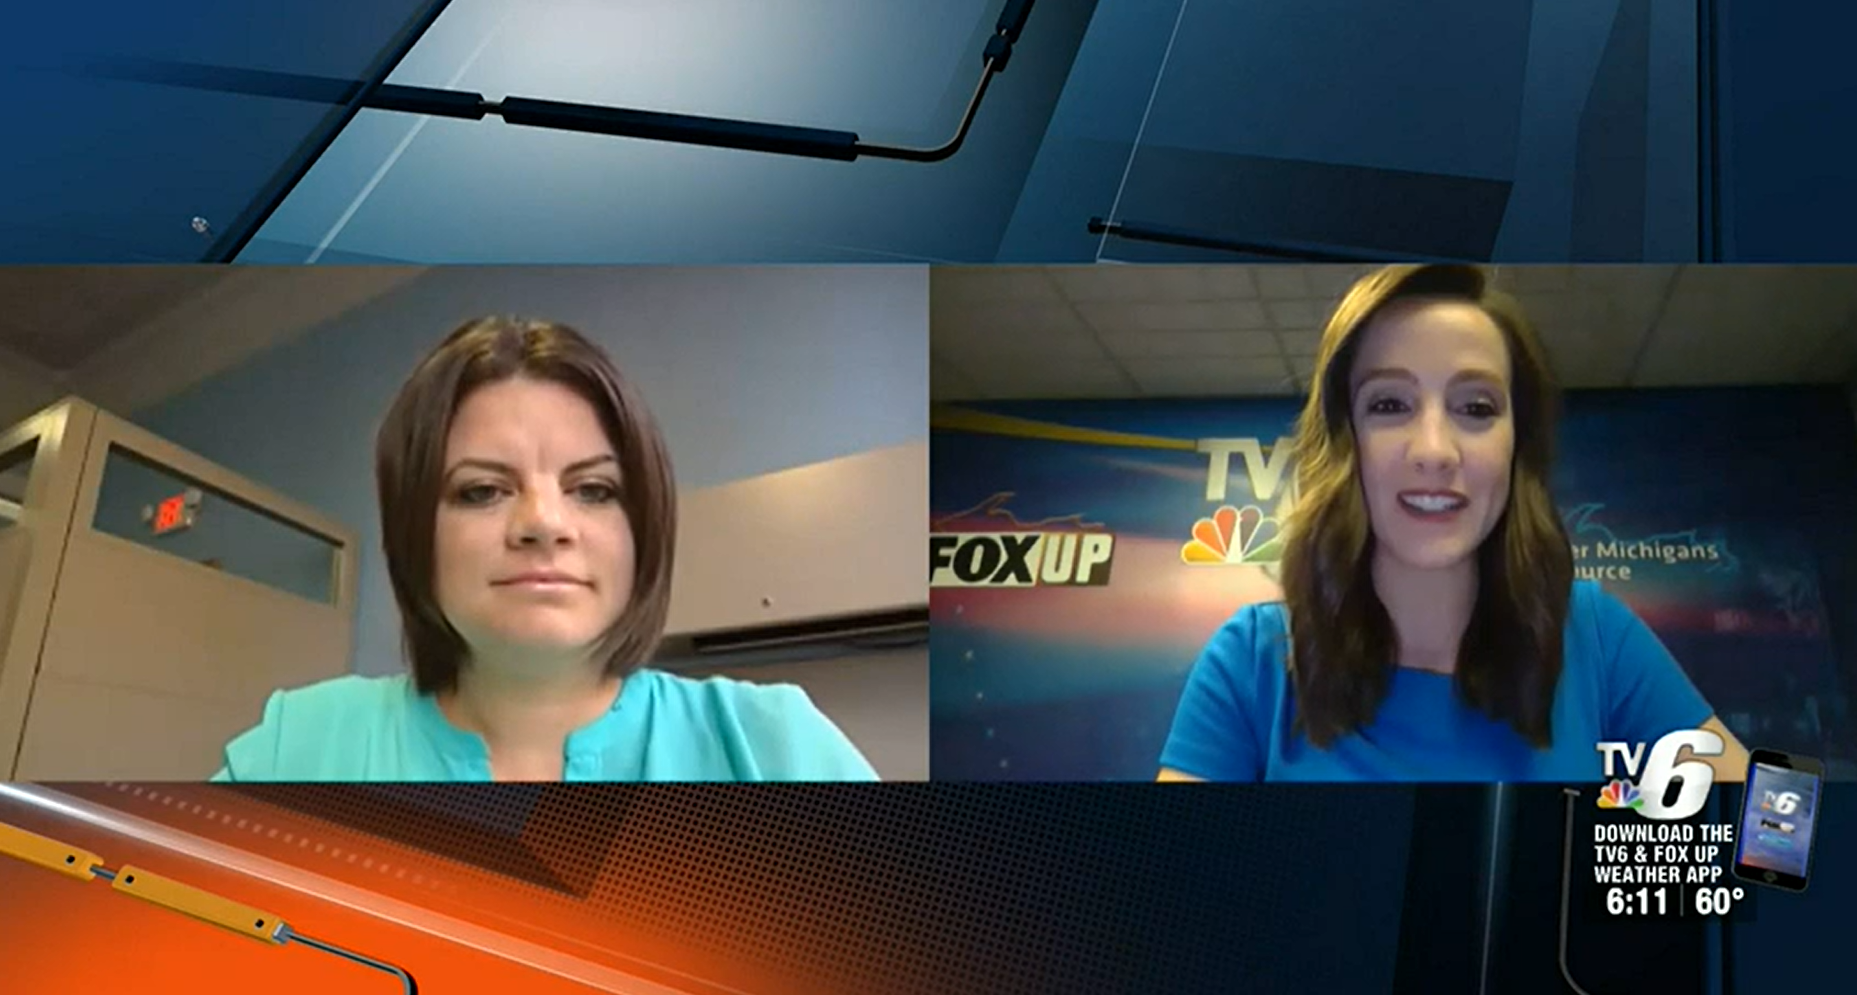 Two women are on the screen side-by-side participating in a virtual interview.